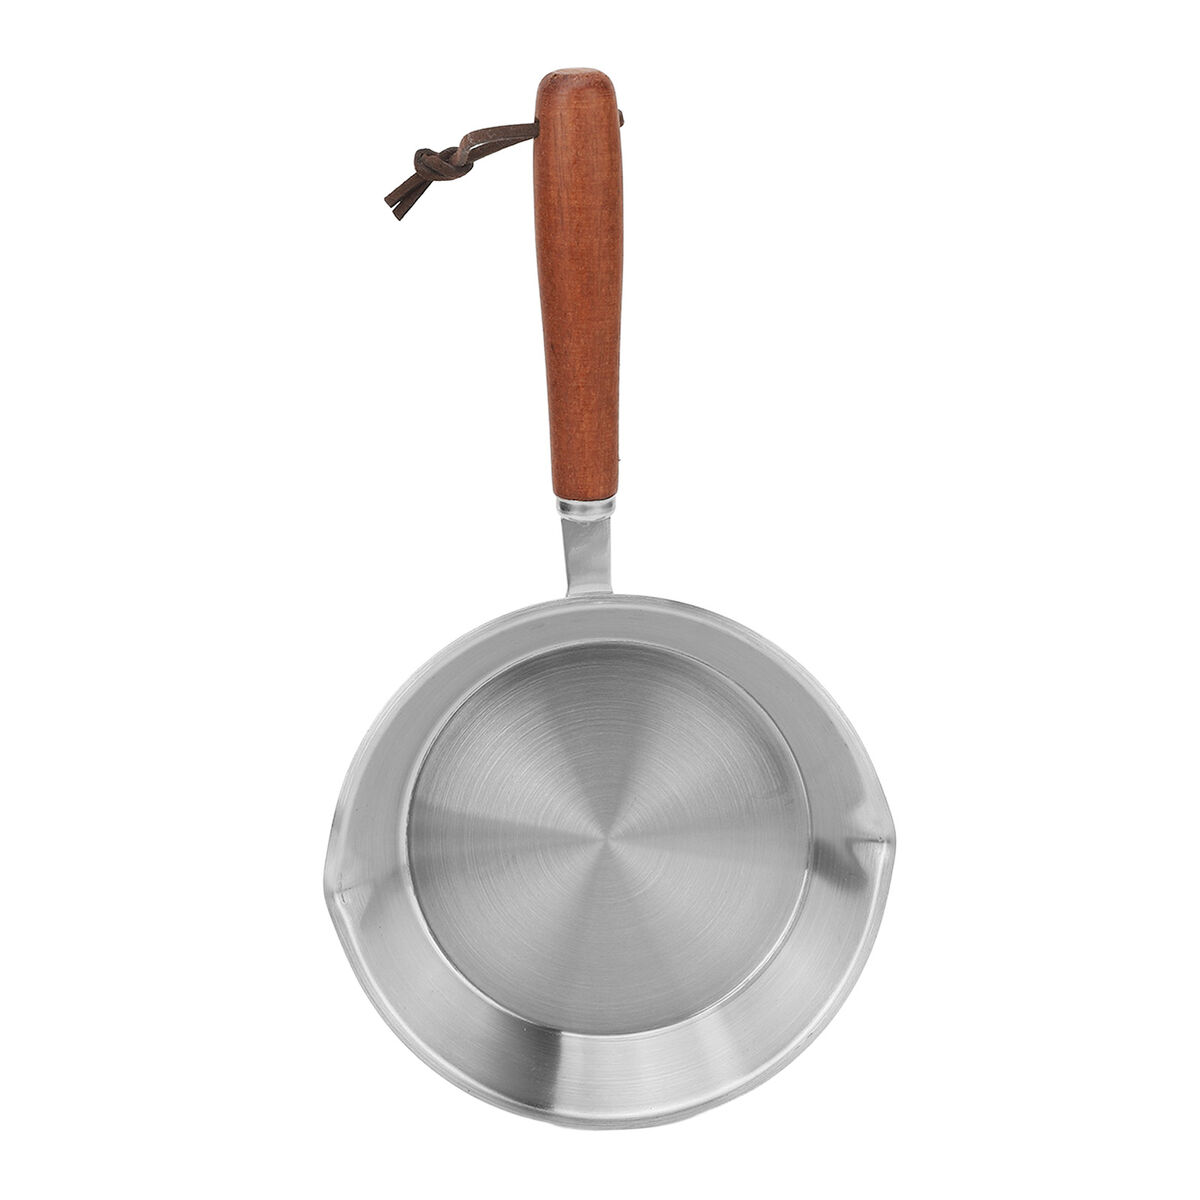 Stainless Steel Non Stick Frying Pan Egg Pan Fry Pan Induction